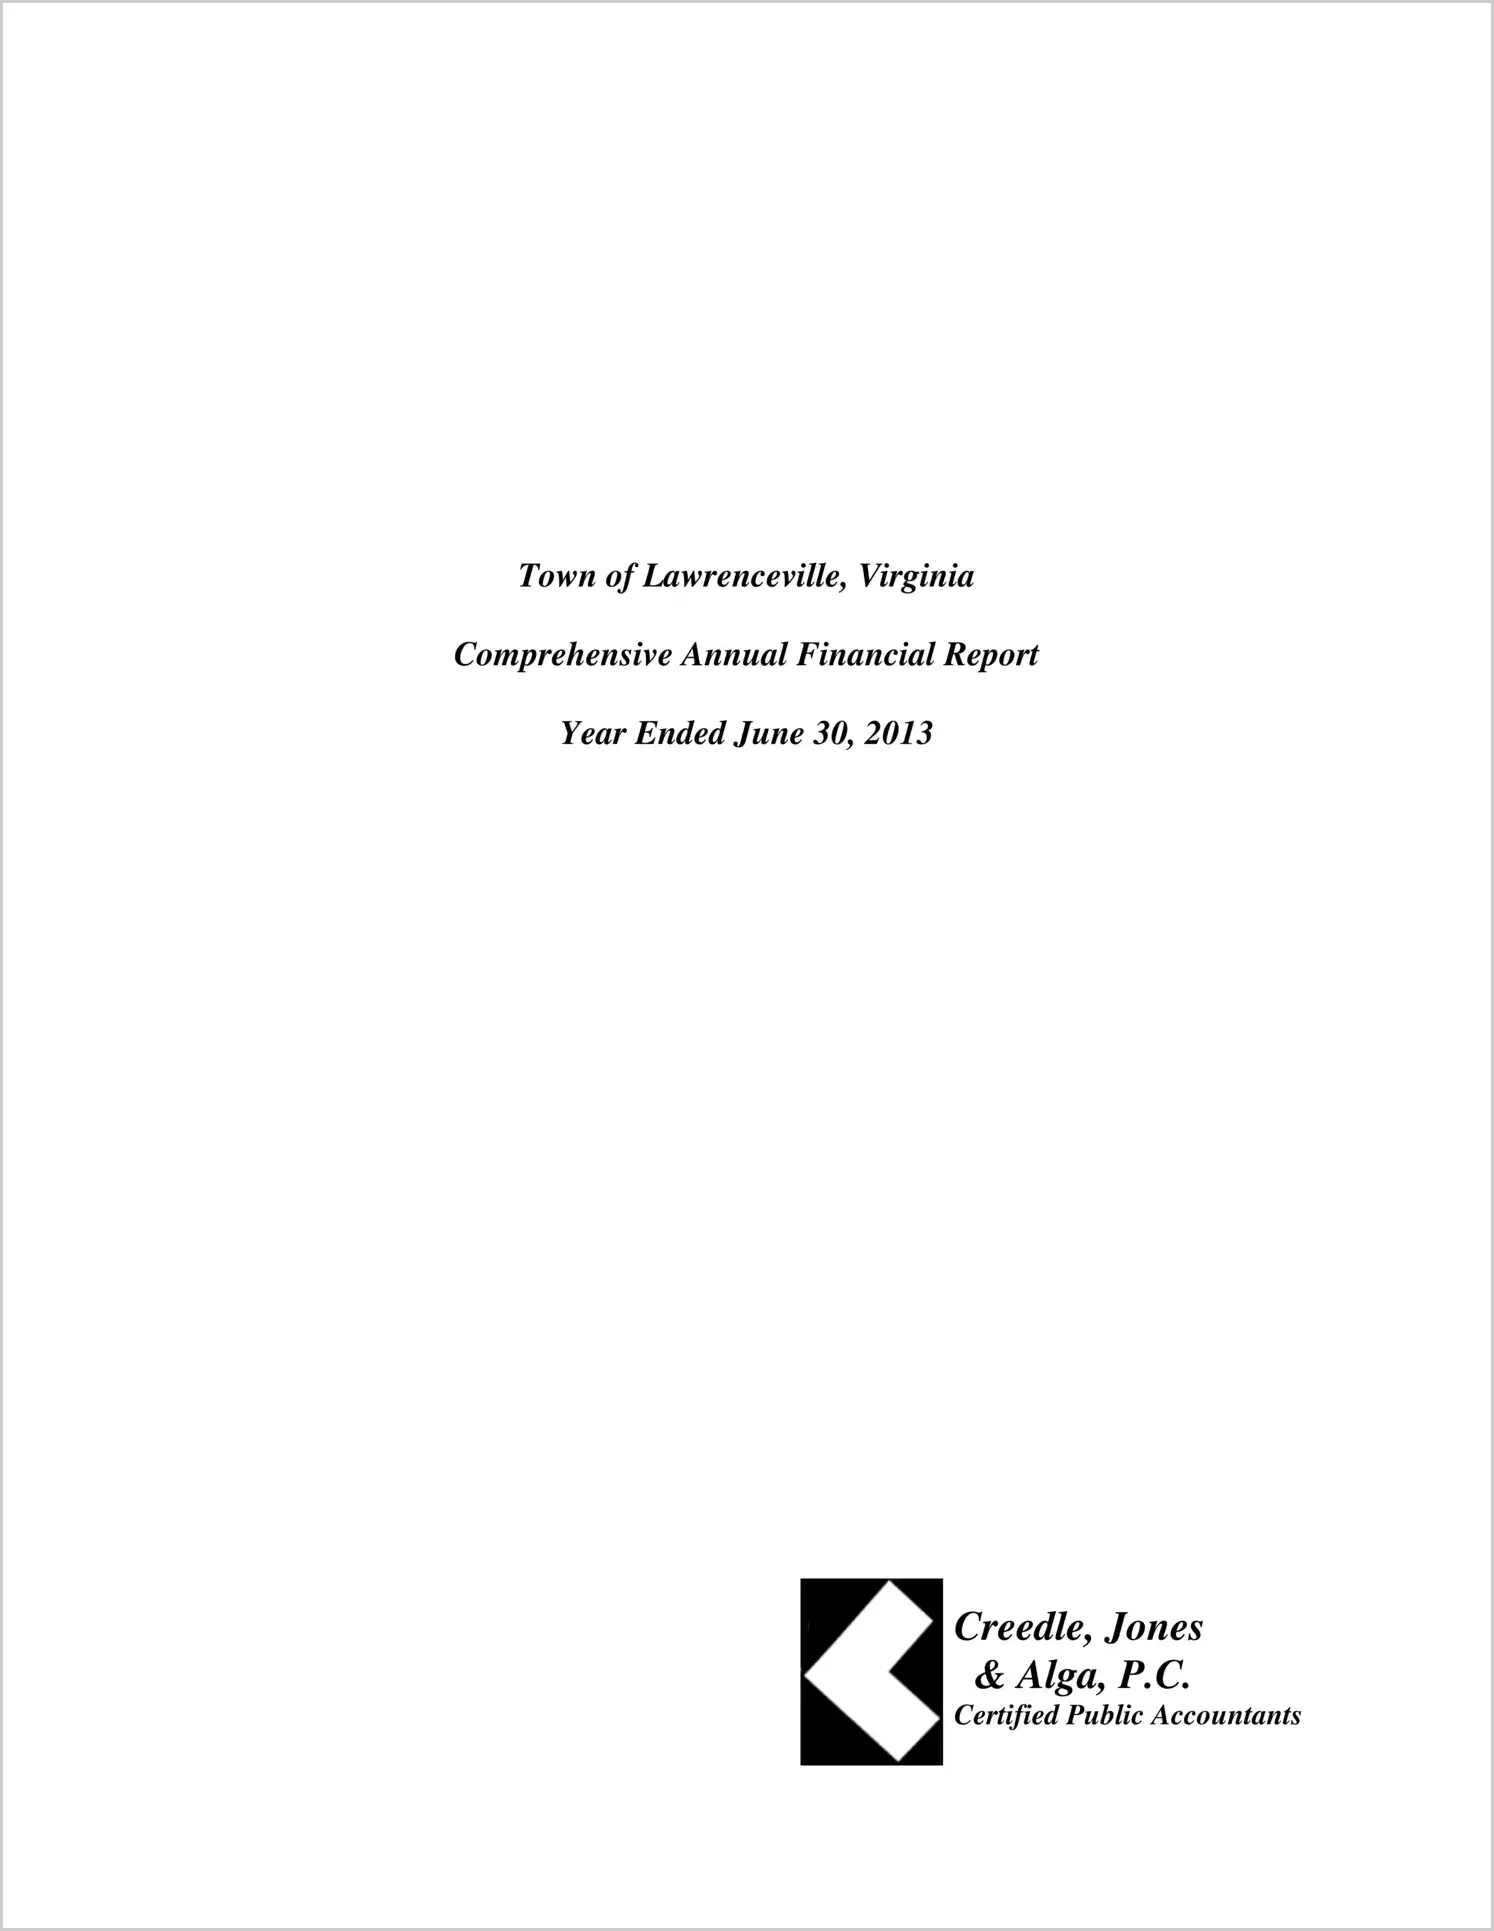 2013 Annual Financial Report for Town of Lawrenceville